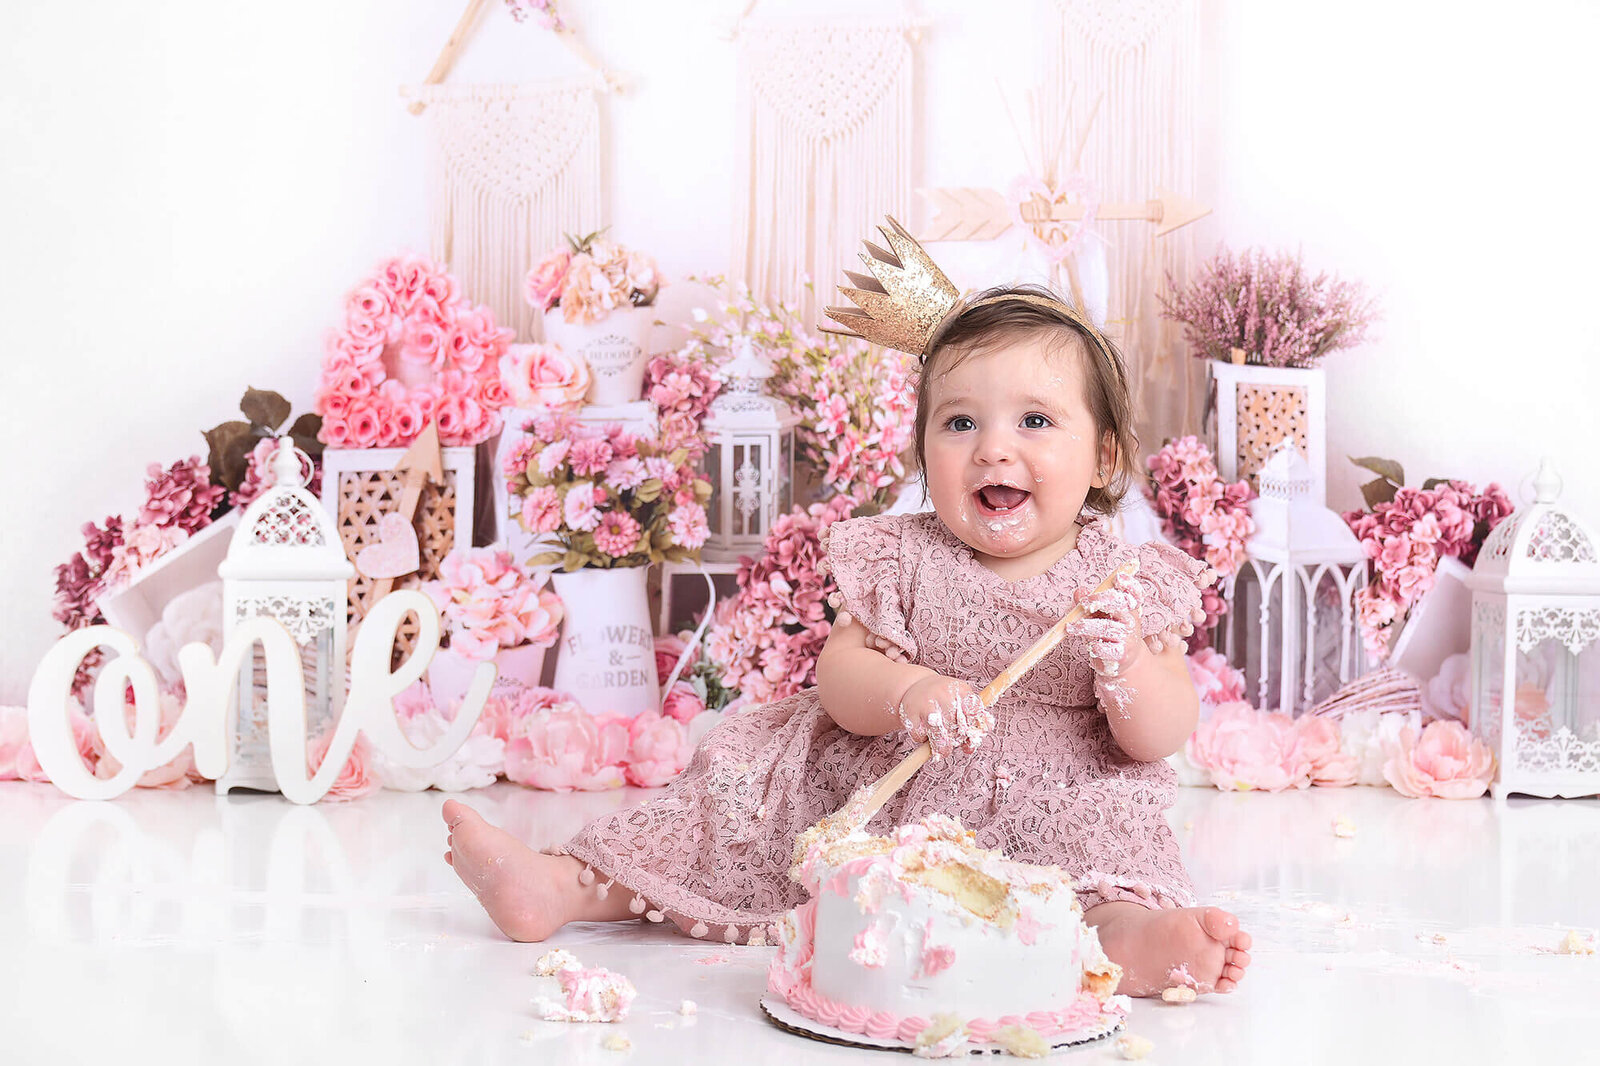 girl smiles at the camera at her cake smash photography shoot with pink flowers behind her